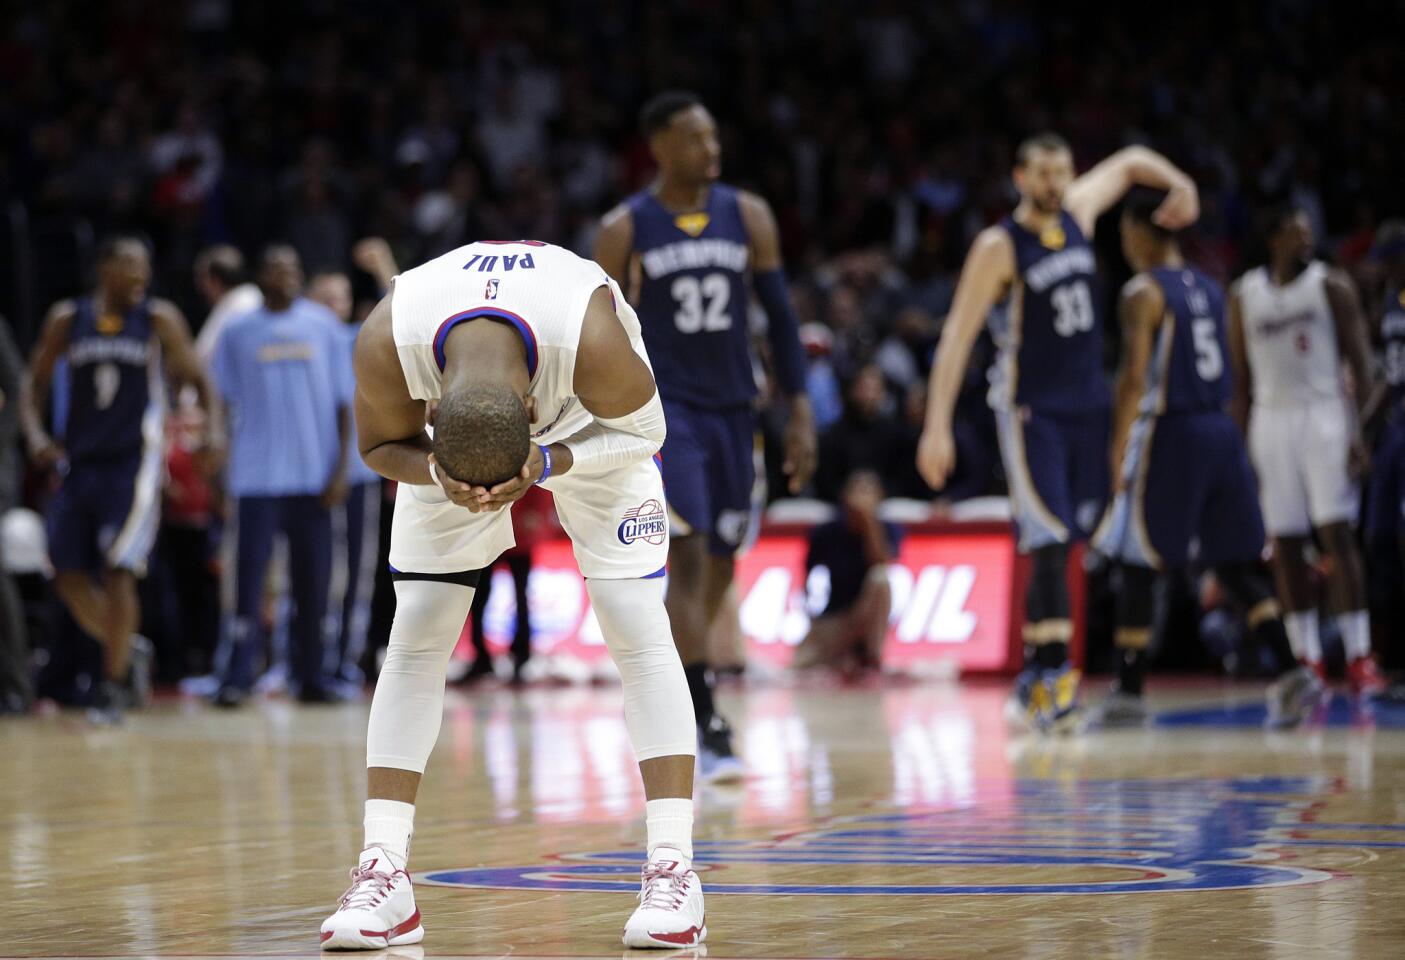 Clippers veteran point guard Chris Paul reacts after having the ball stolen from him in the final seconds of a close loss against the Memphis Grizzlies on Monday.